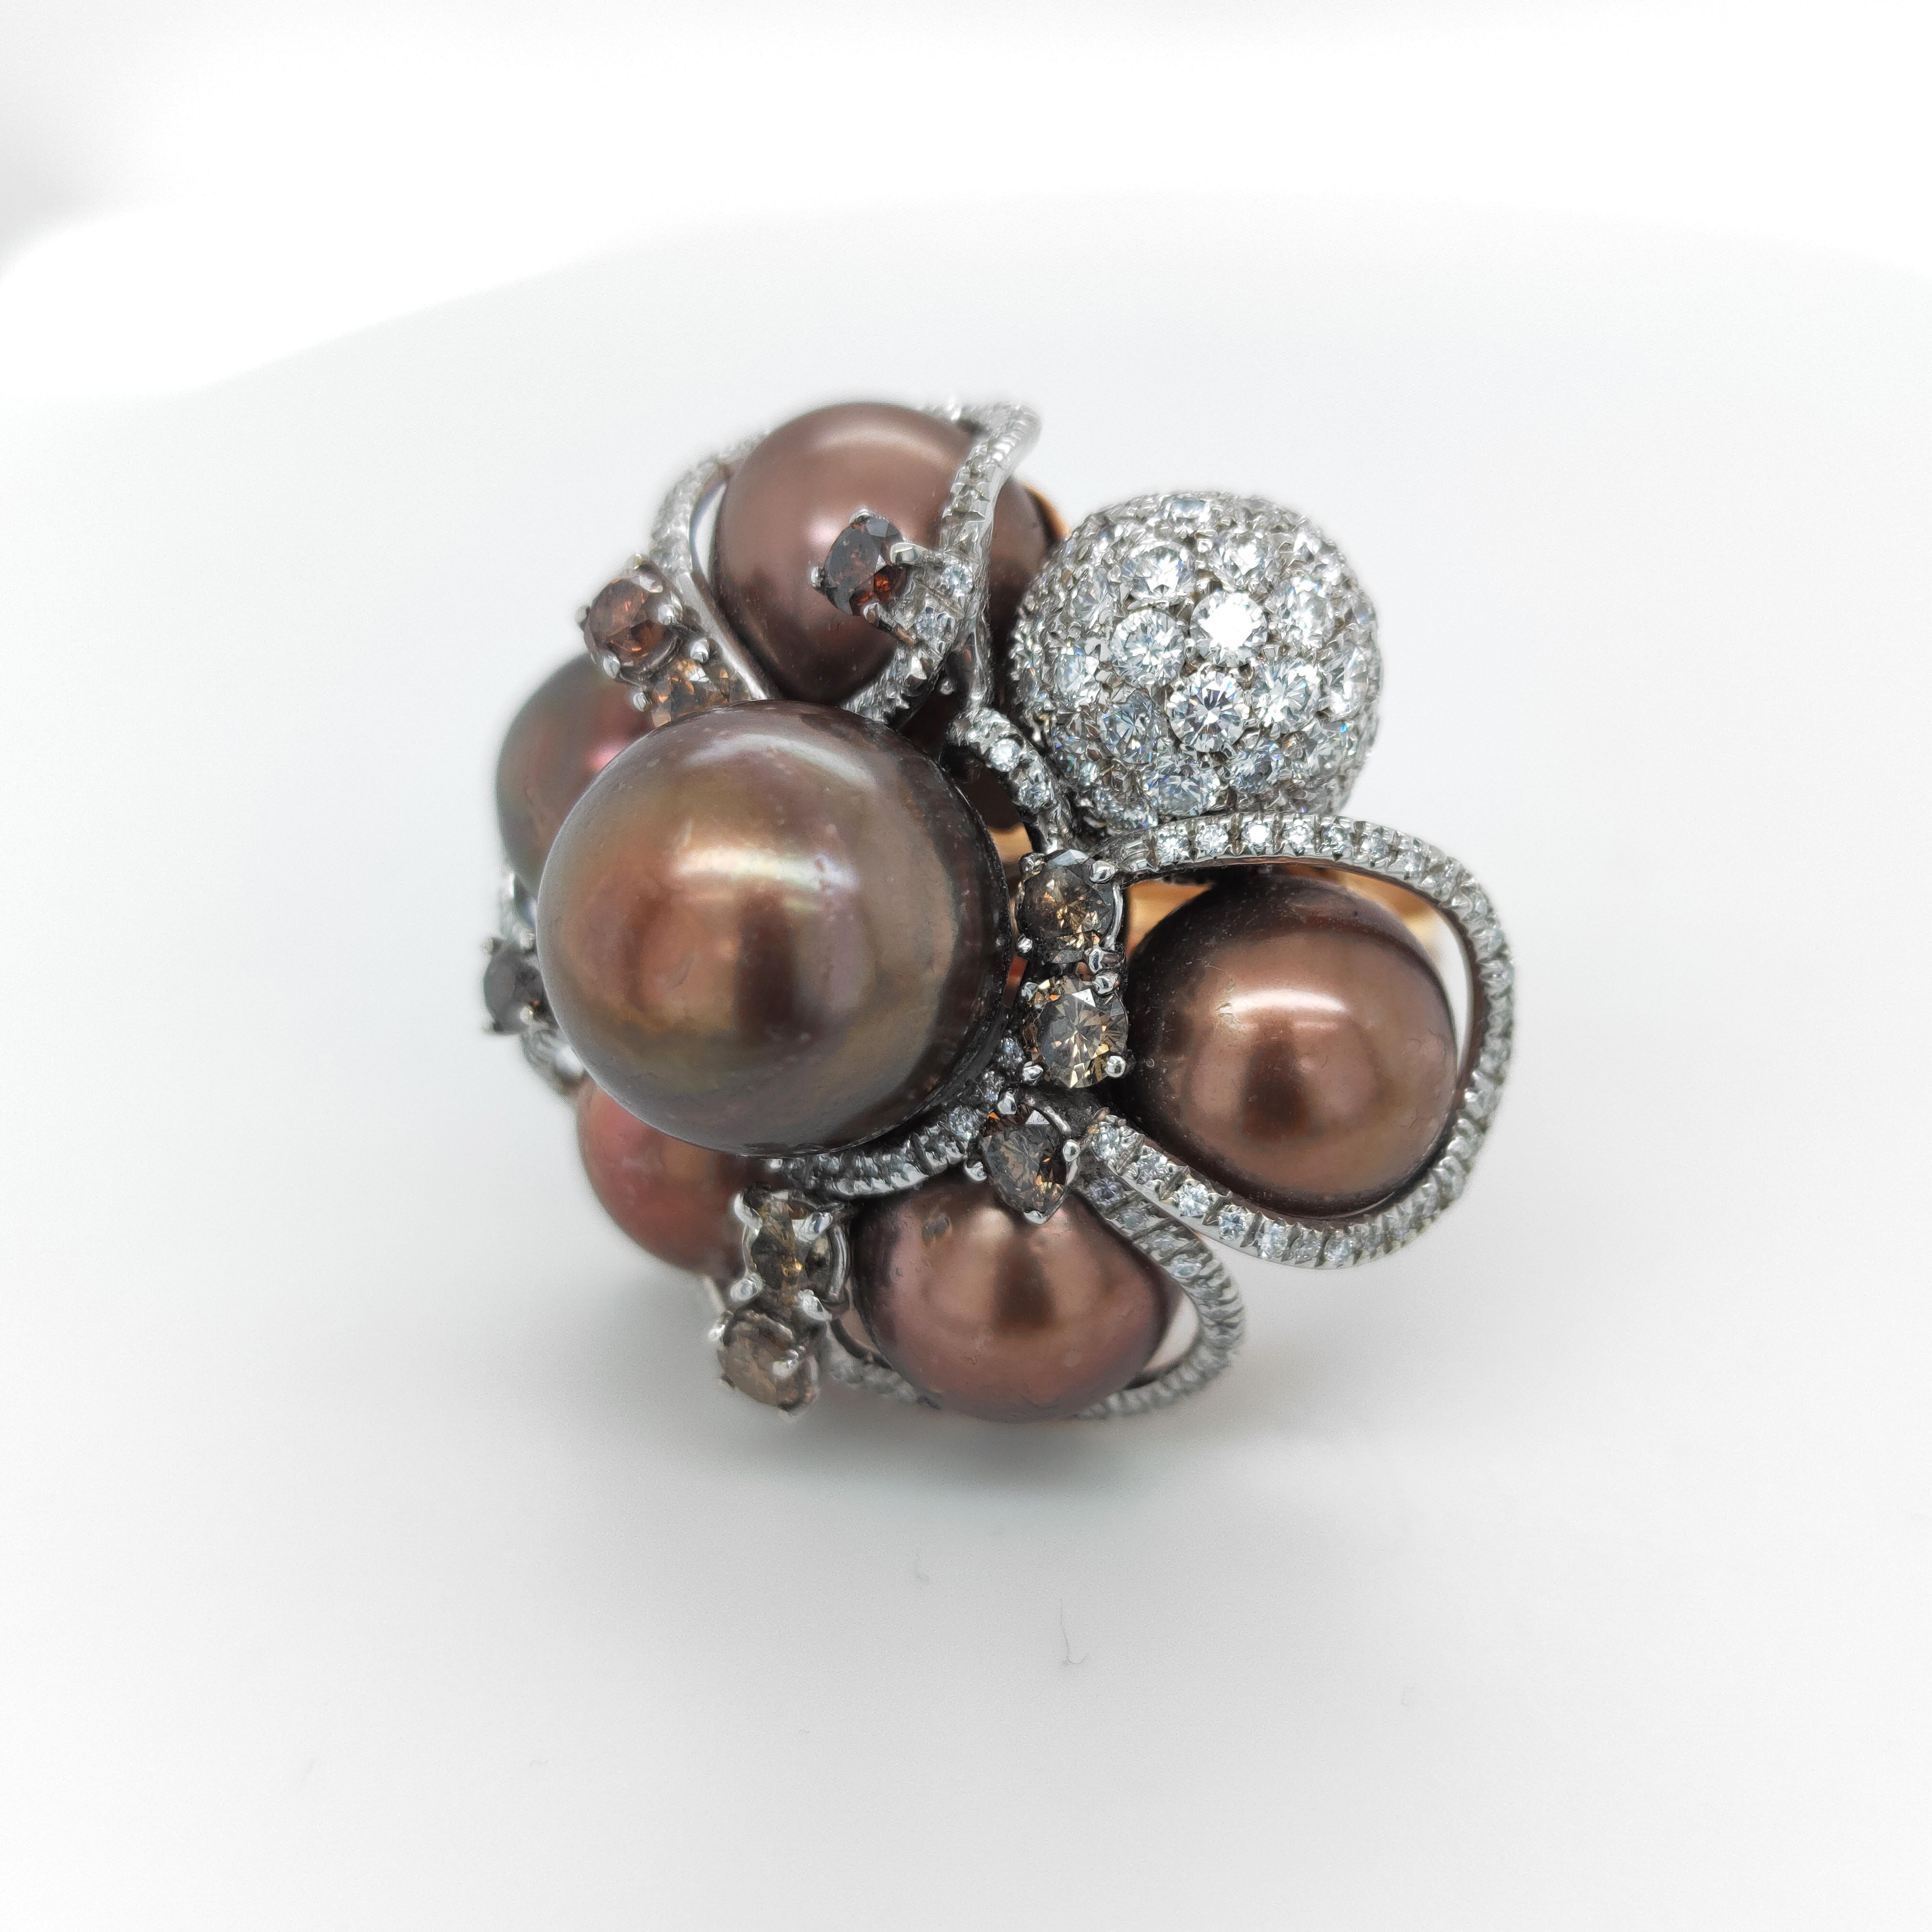 Brilliant Cut Tahiti Chocolate Pearls & Diamonds Cocktail Ring 18Kt Gold - 3, 65cts diamonds For Sale